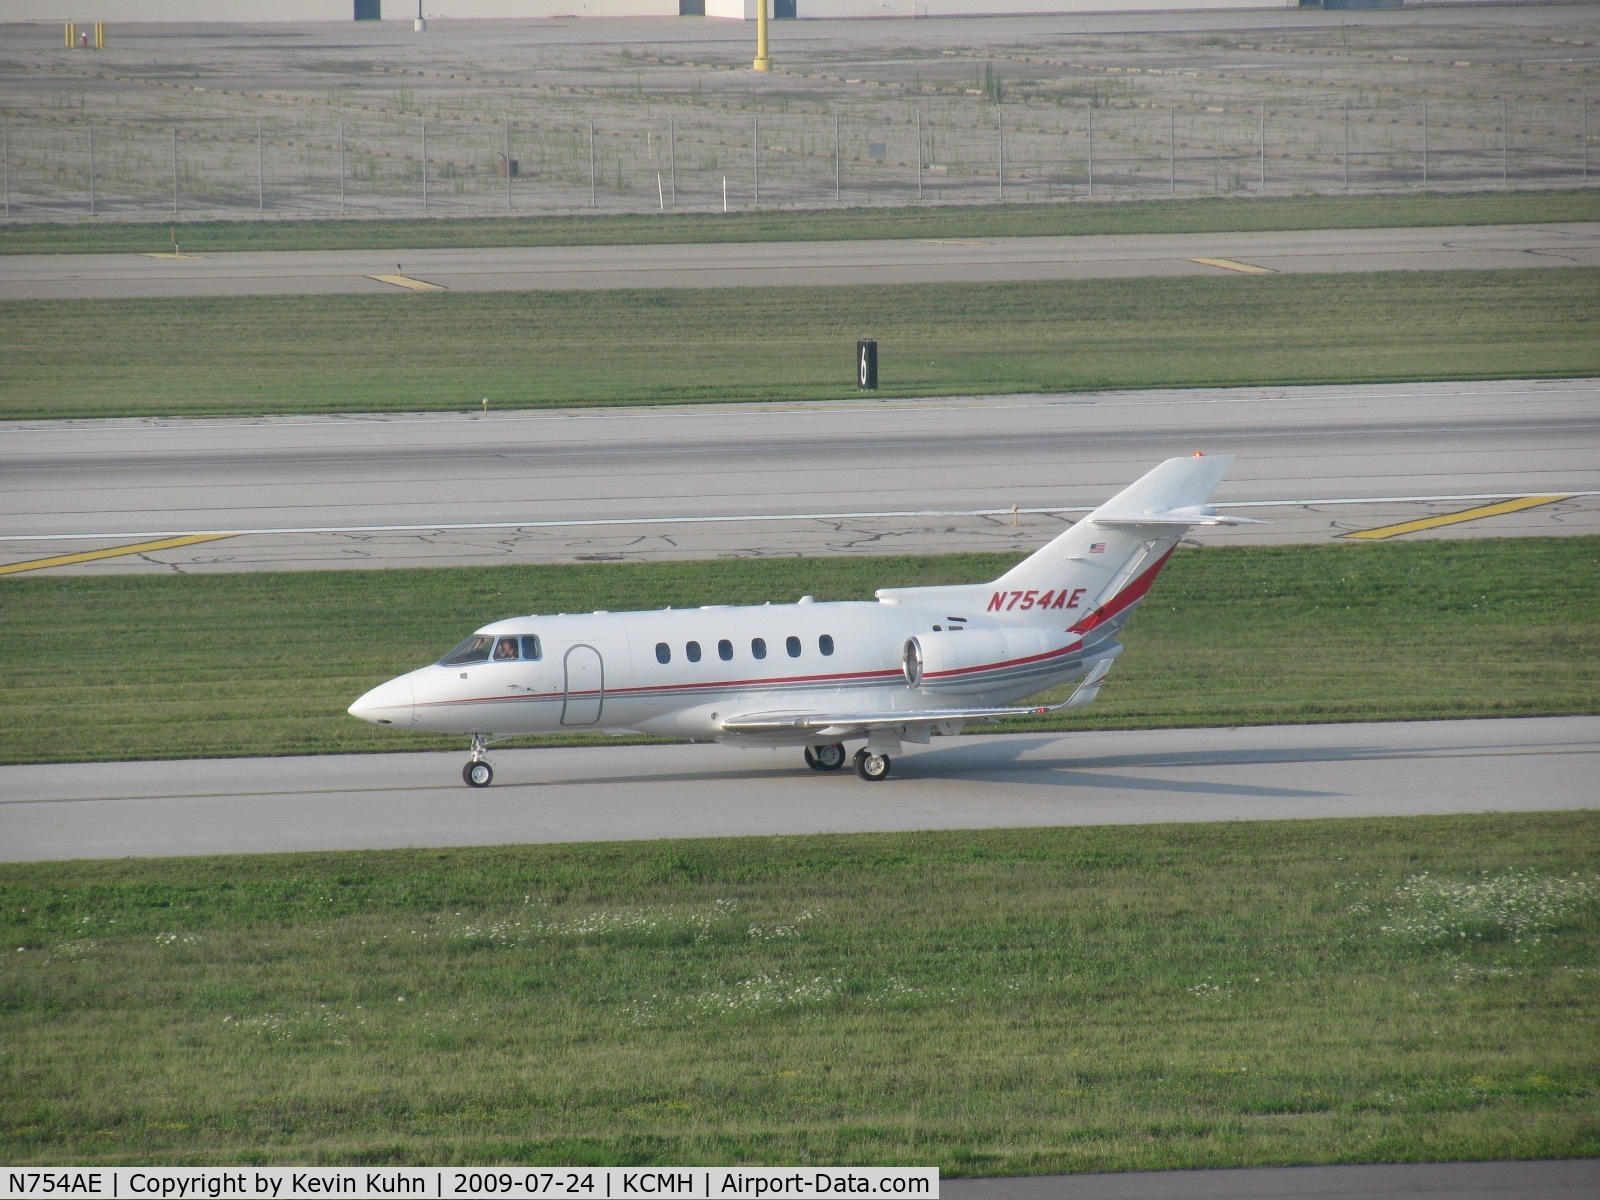 N754AE, 2005 Raytheon Hawker 850XP C/N 258754, Everything is better with winglets